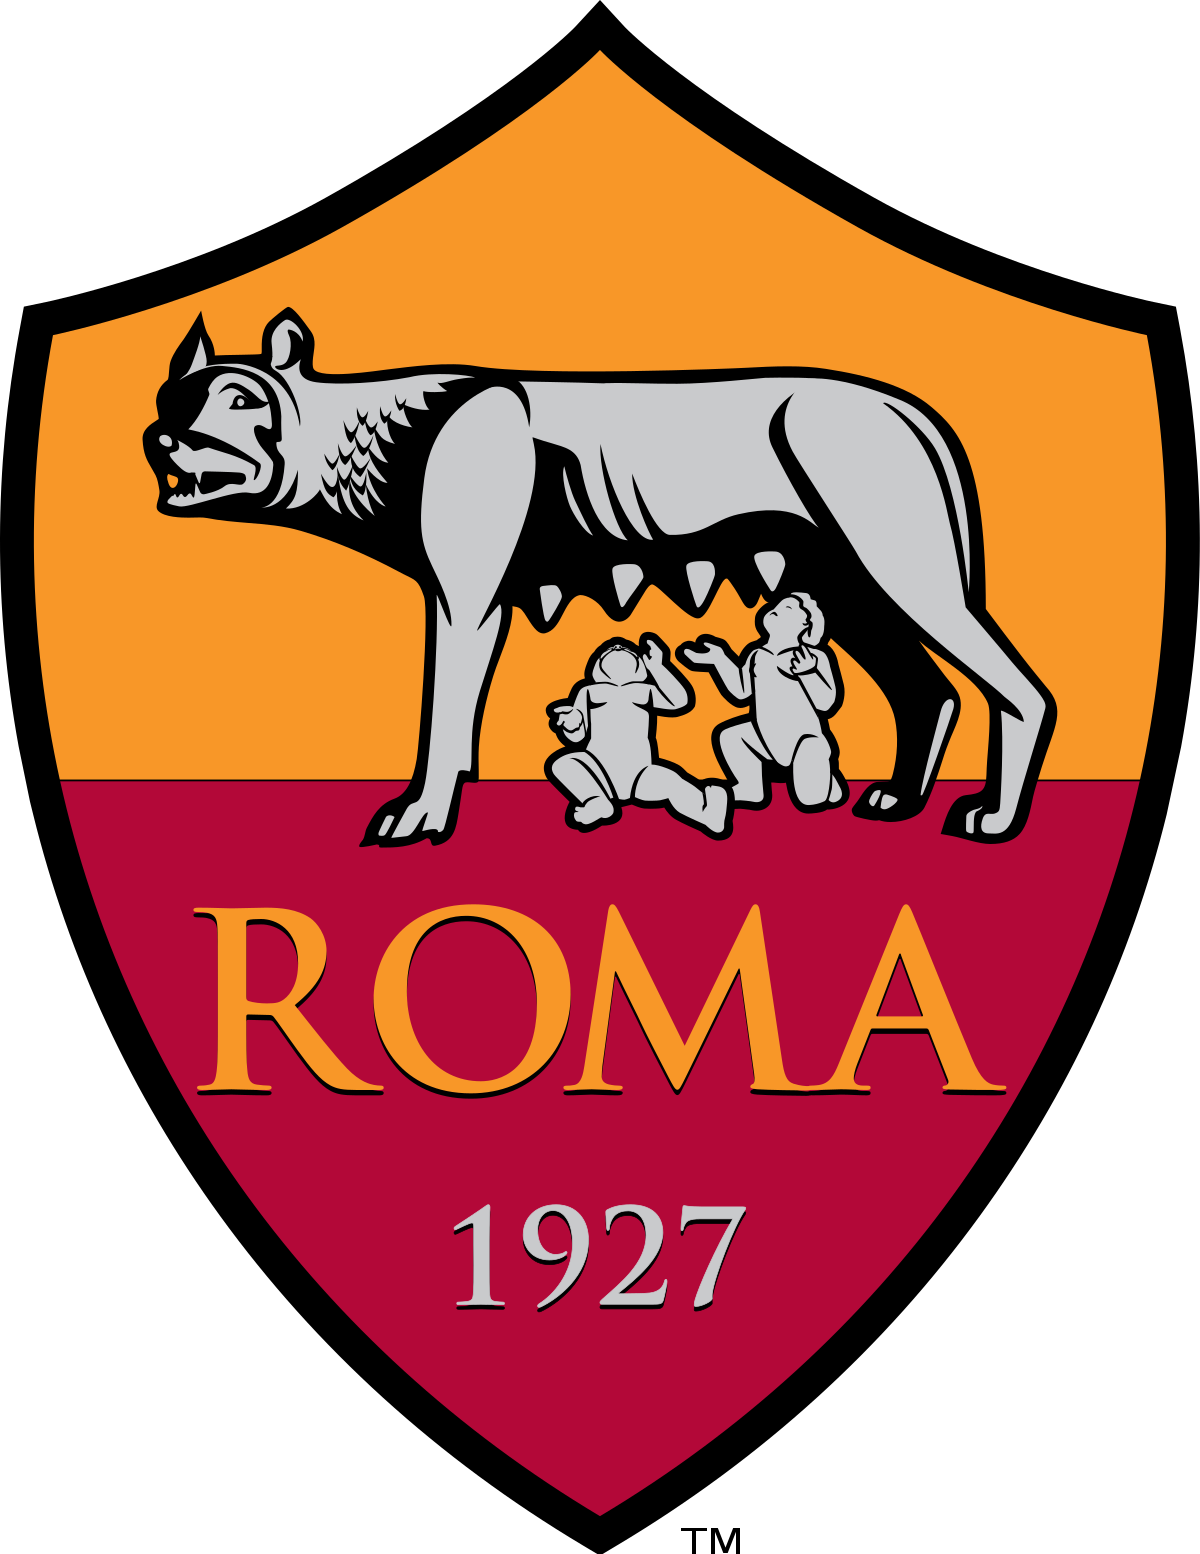 AS Roma announced its arrival